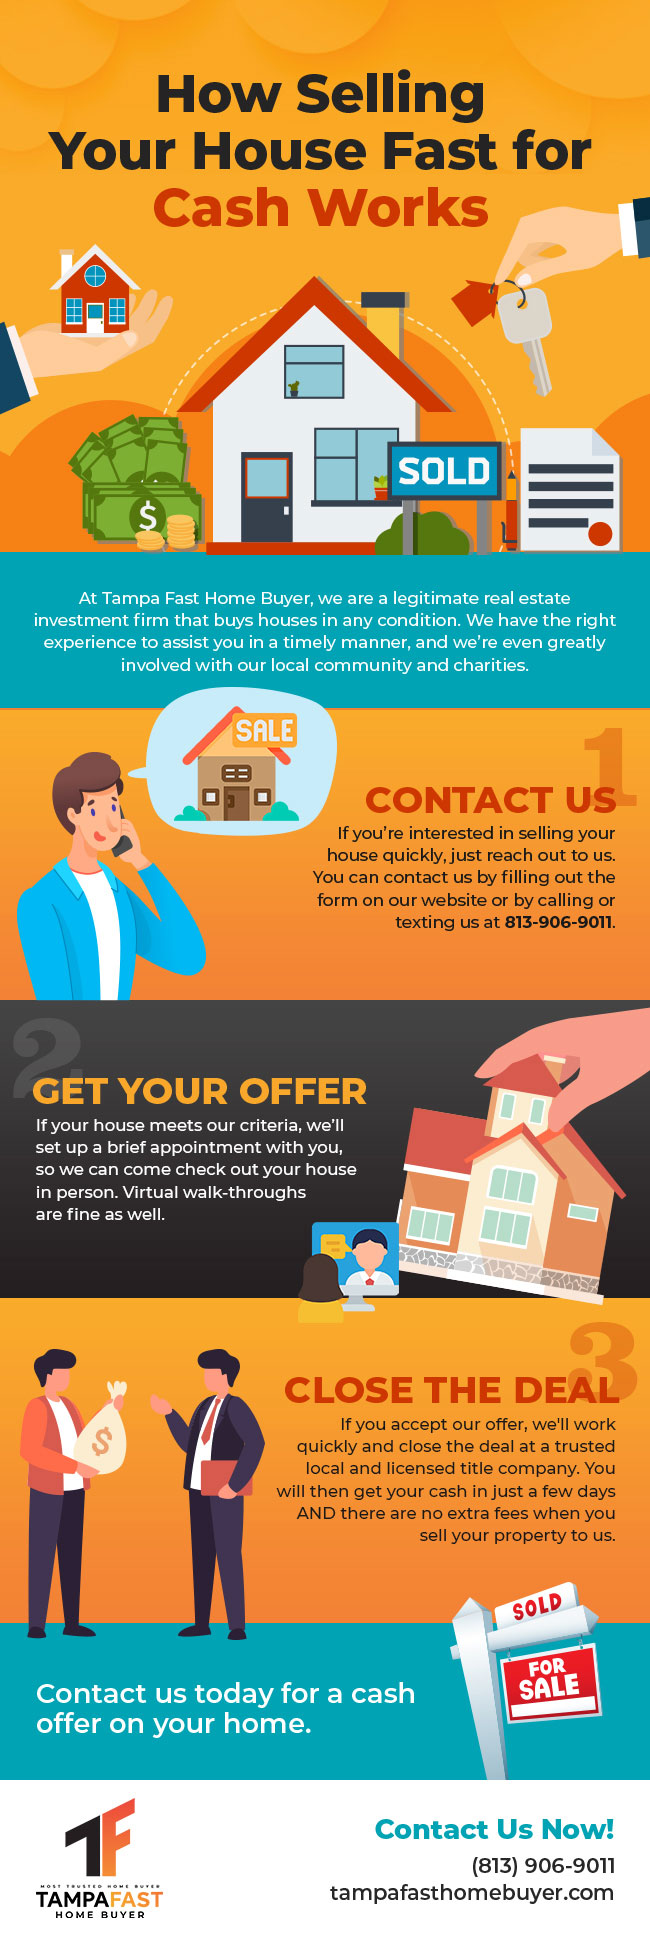 Find out how selling your house for cash works.